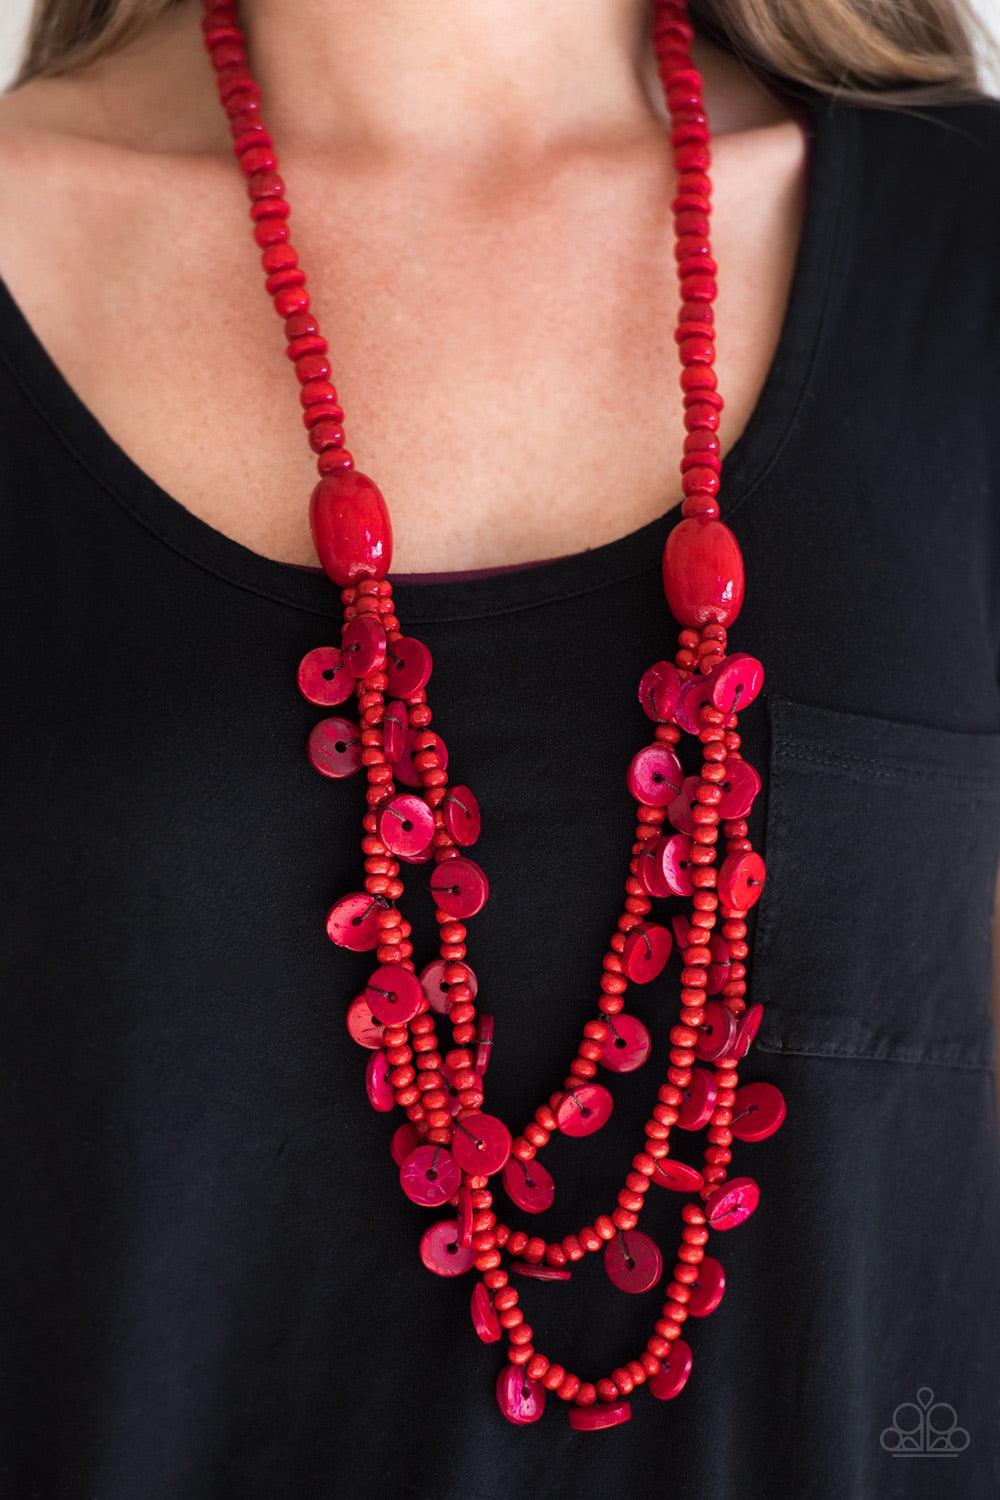 Paparazzi Accessories Safari Samba - Red Brushed in a fiery red finish, two bold wooden beads give way to summery layers. Brushed in a distressed finish, dainty wooden discs swing from the bottom of the layers for a flirty finish. Jewelry